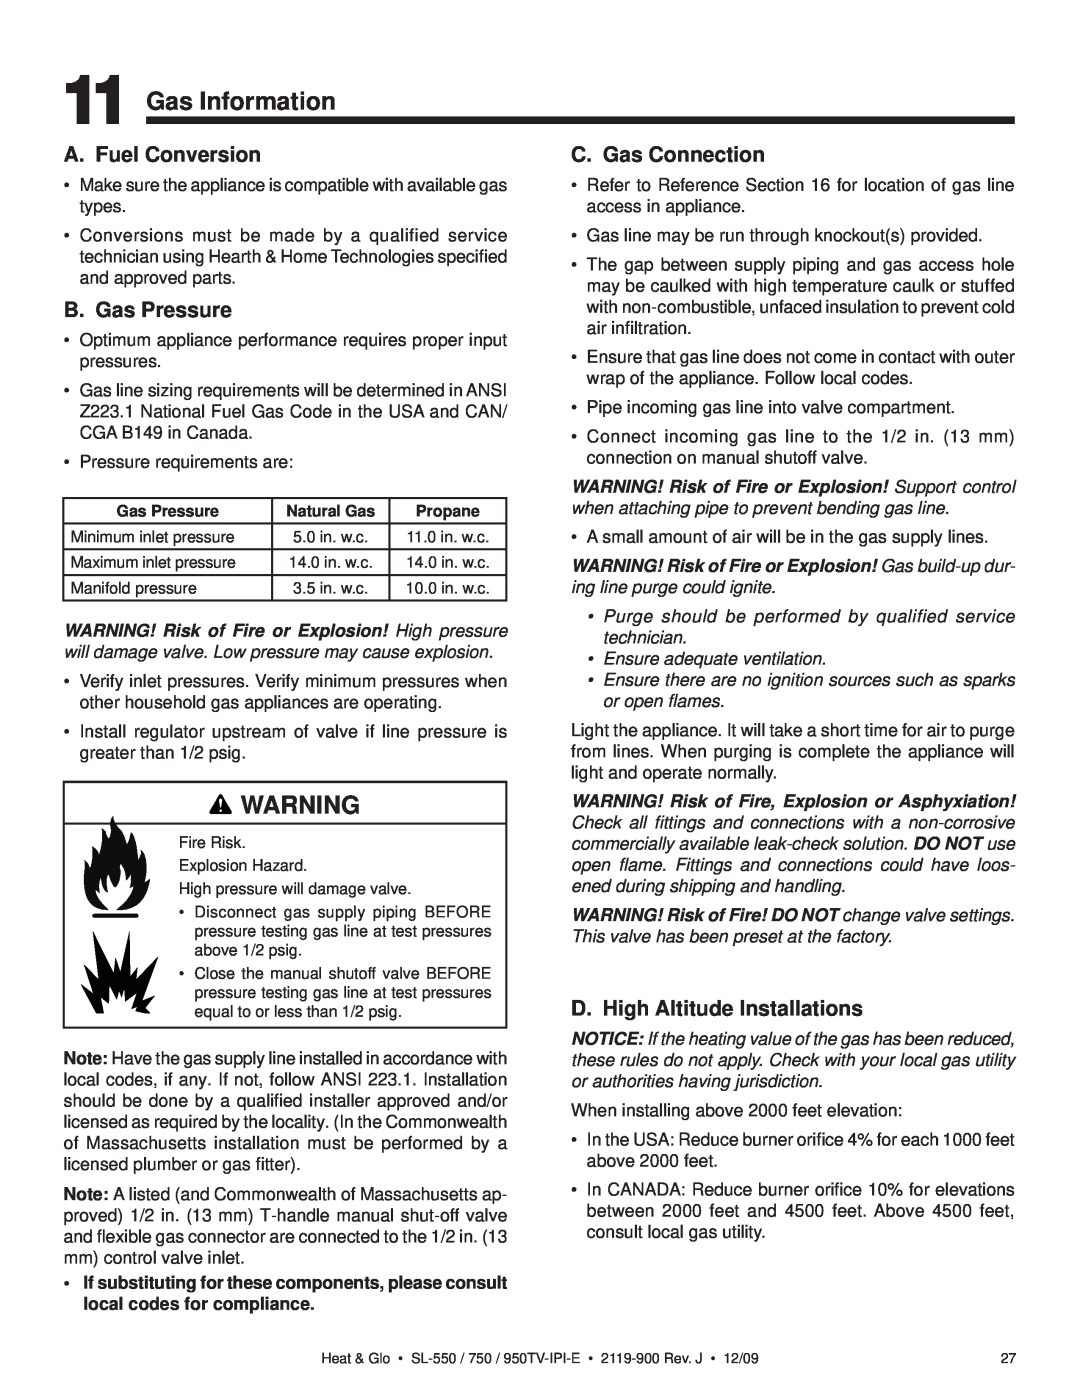 Heat & Glo LifeStyle SL-950TV-IPI-E owner manual Gas Information, A. Fuel Conversion, B. Gas Pressure, C. Gas Connection 